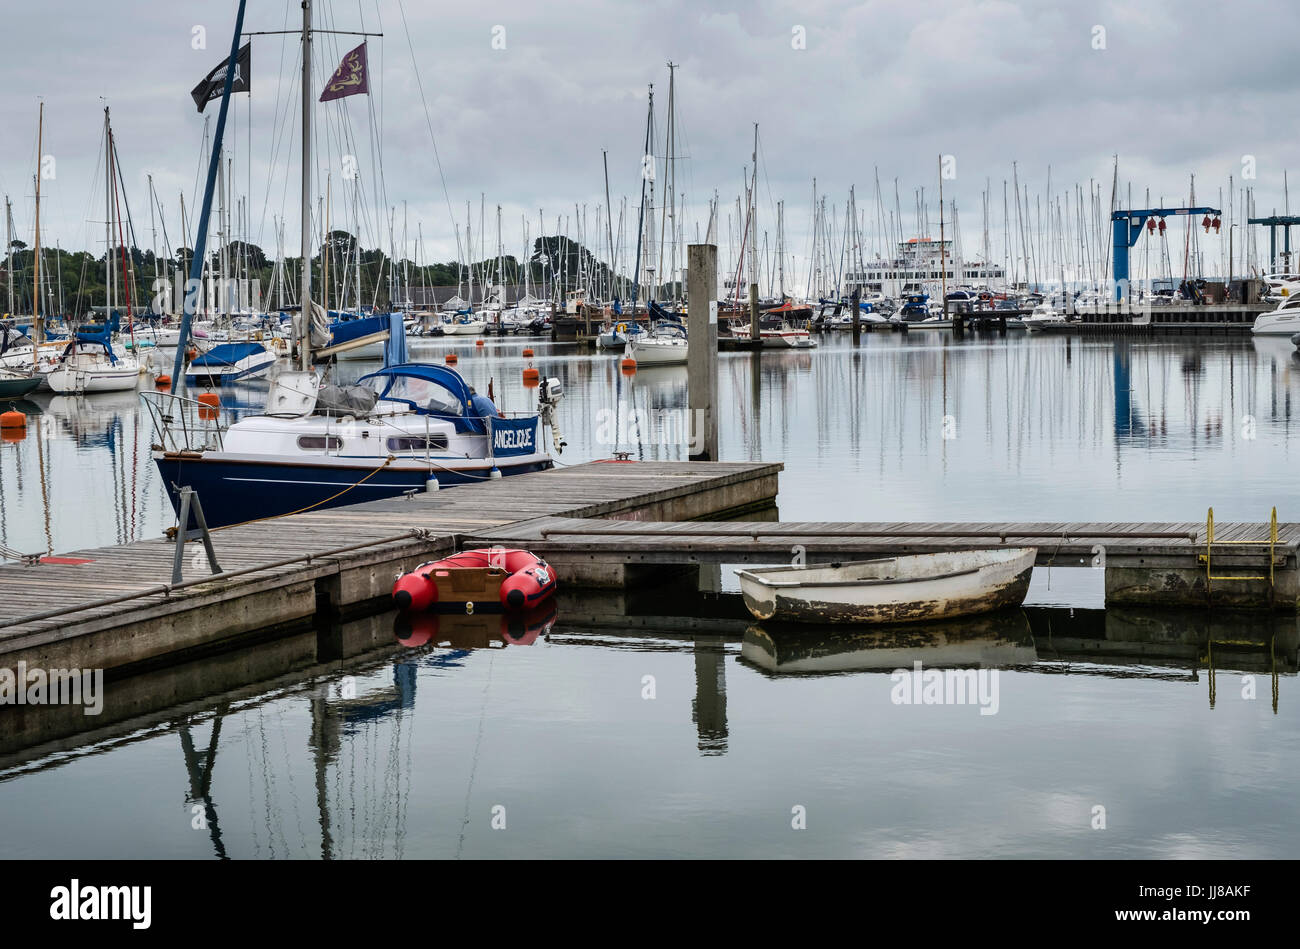 Lymington Harbour, with view of boats, yachts and mooring pontoons, from Town Quay towards the Lymington River, Hampshire, England, UK Stock Photo